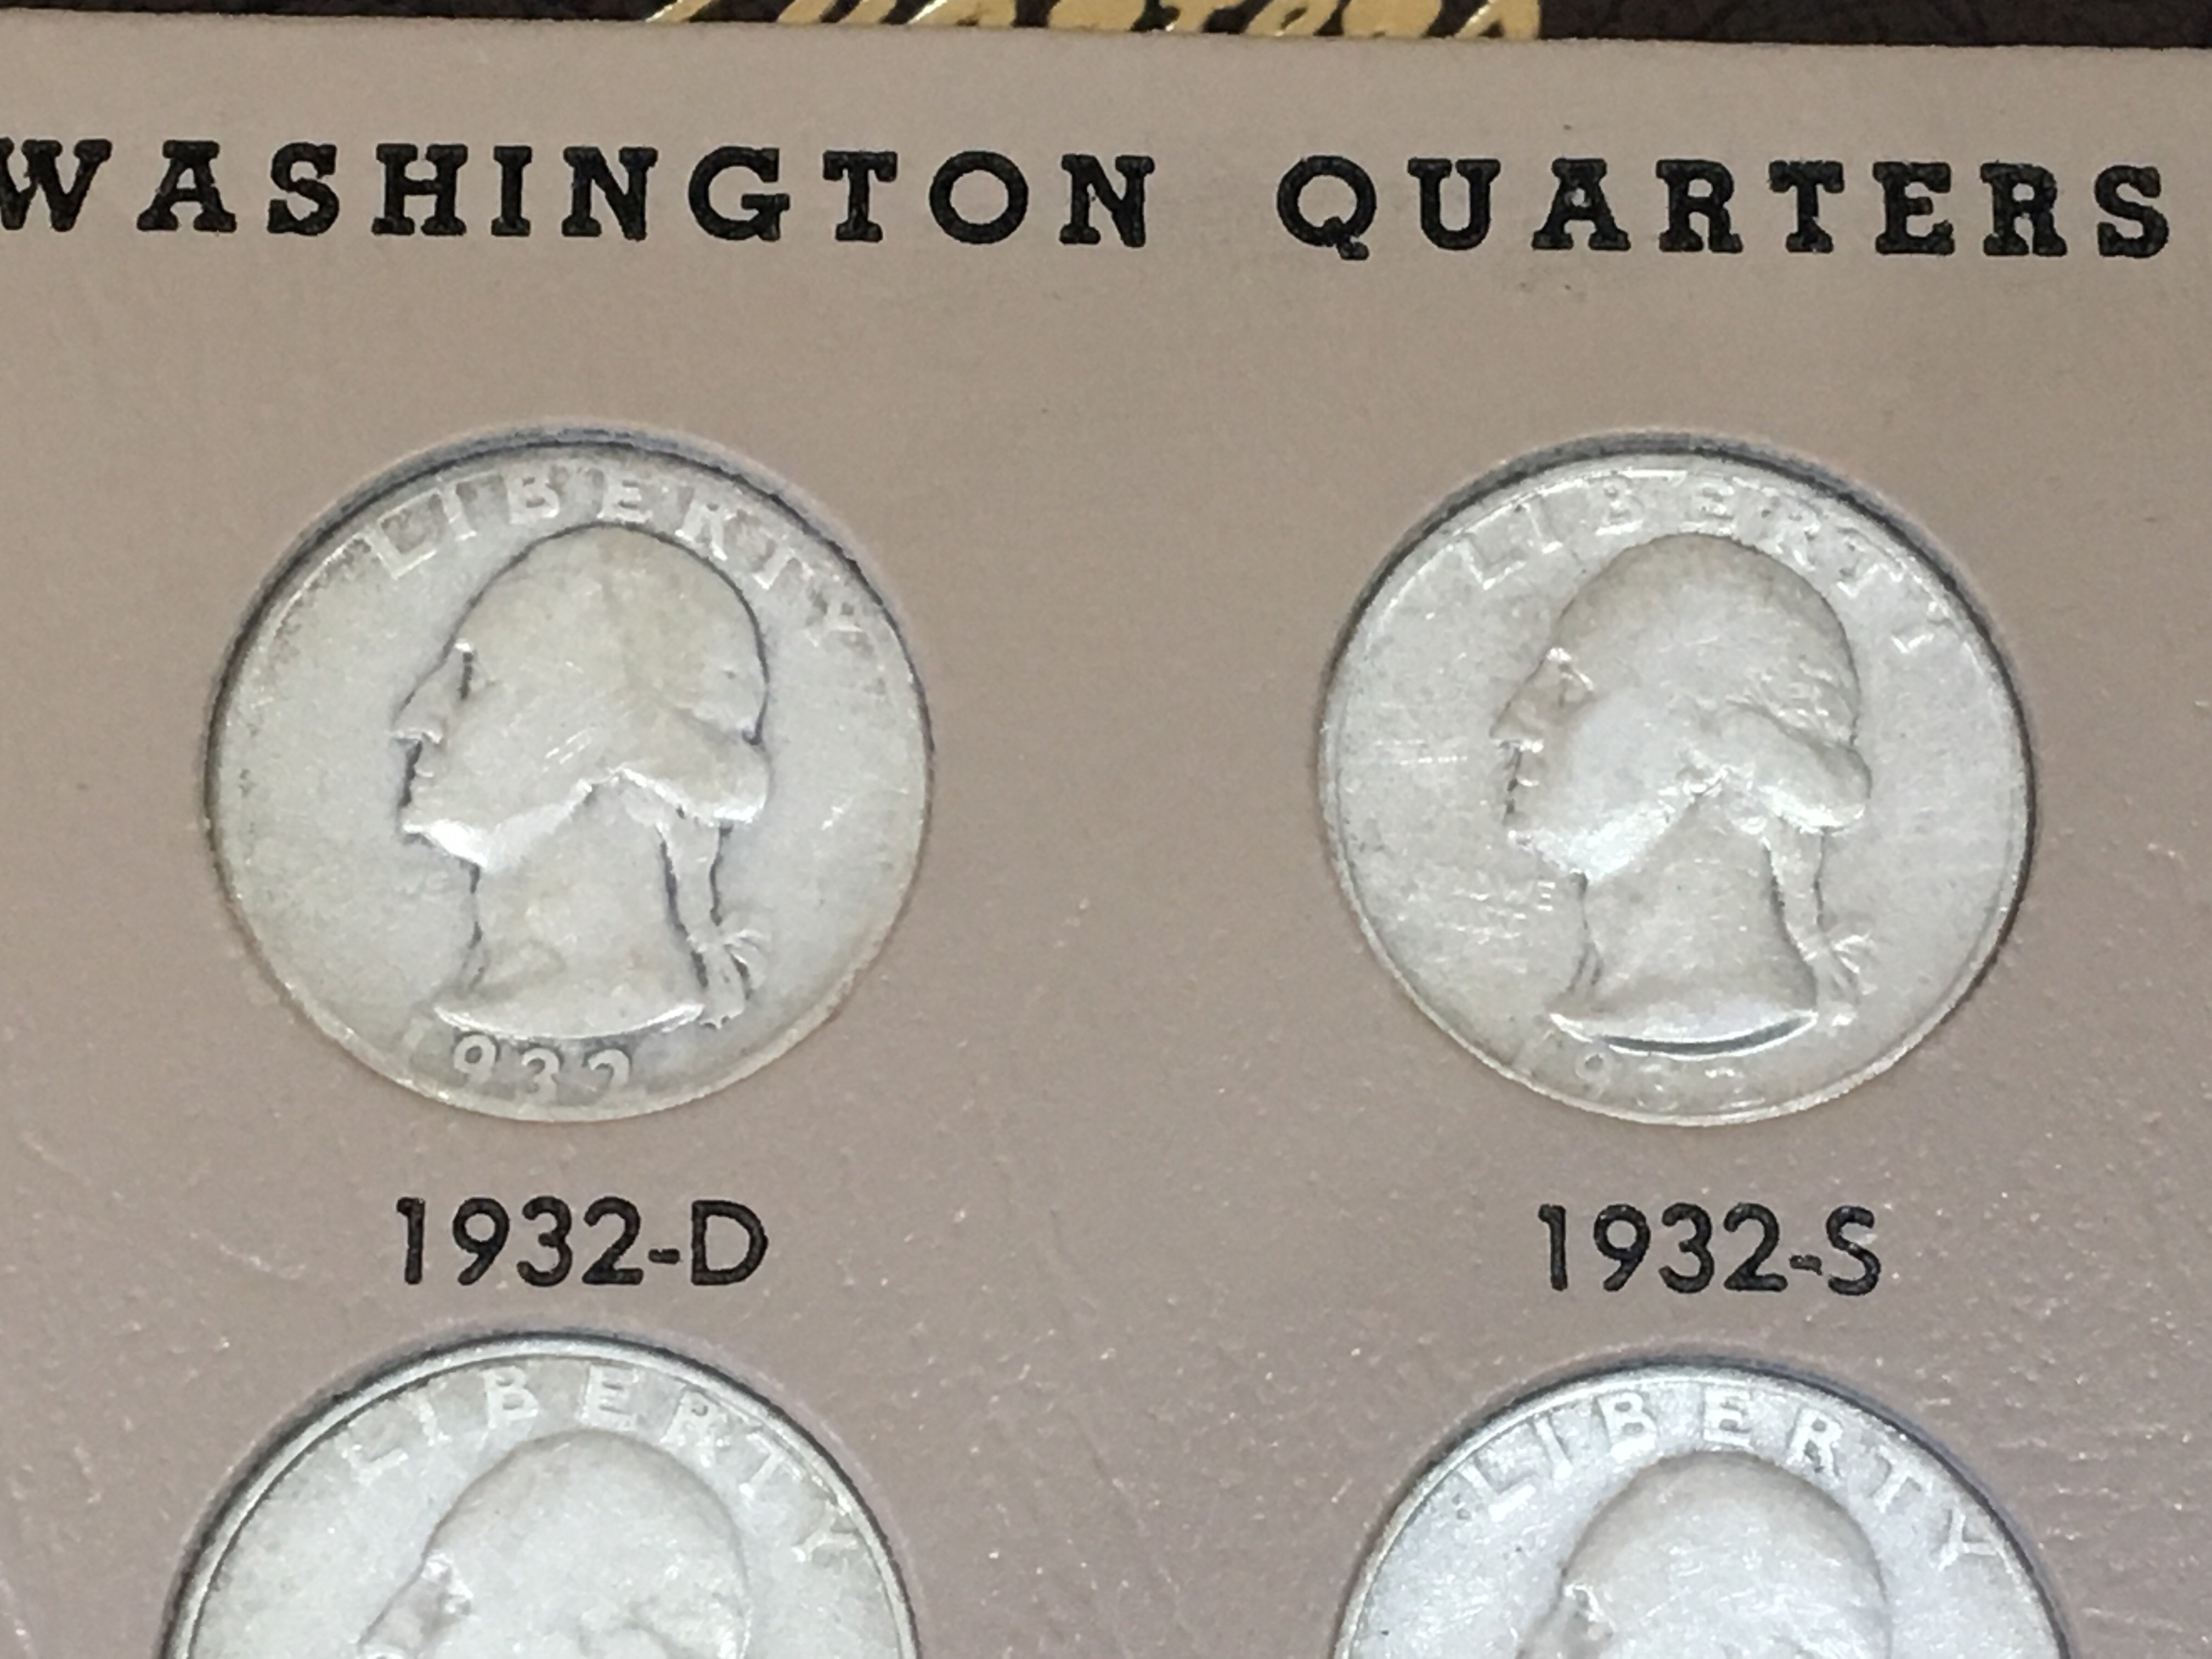 A Full and complete set of Washington Quarters 193